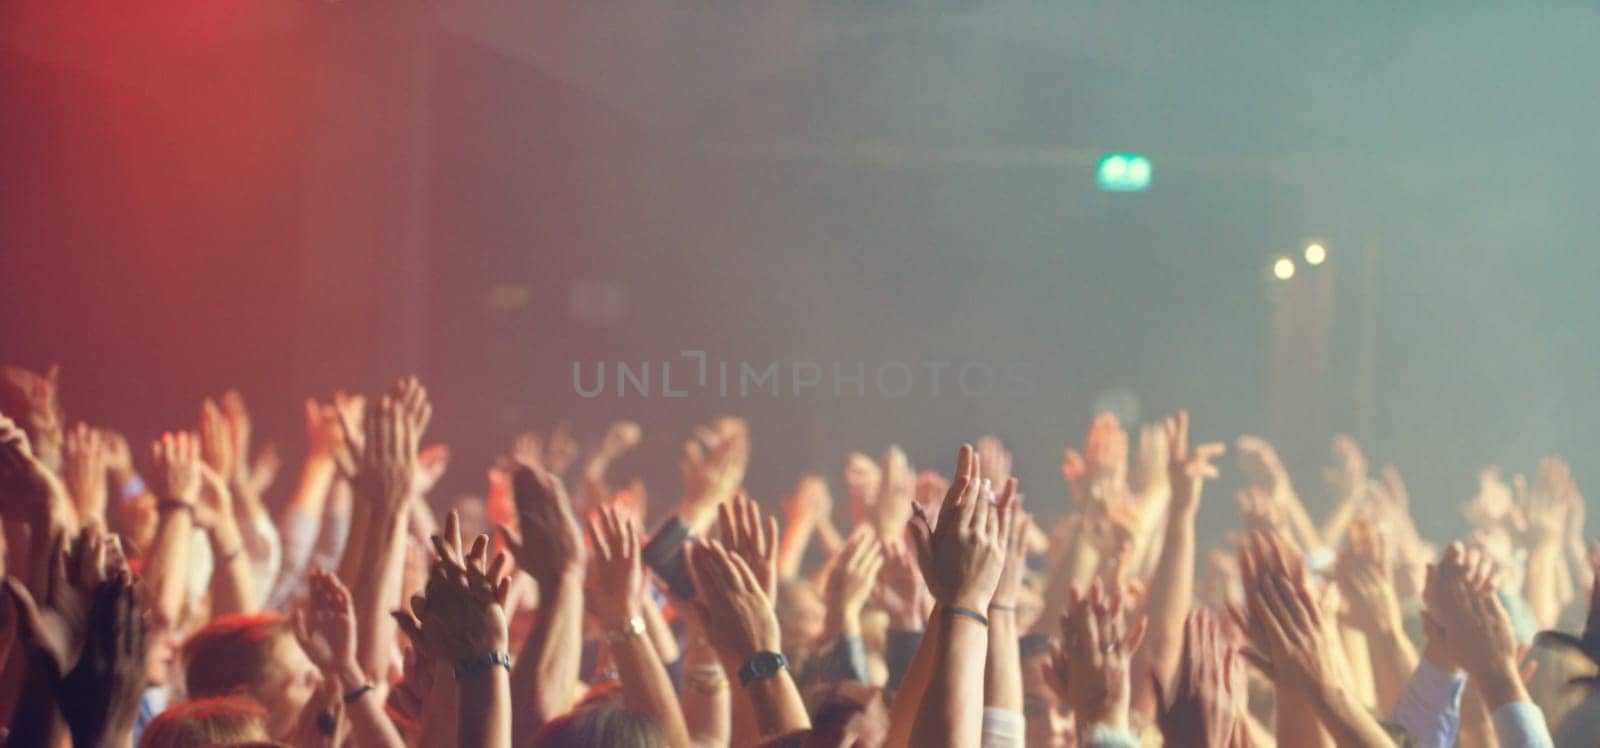 A crowd of people celebrating and partying with their hands in the air to an awesome band. This concert was created for the sole purpose of this photo shoot, featuring 300 models and 3 live bands. All people in this shoot are model released